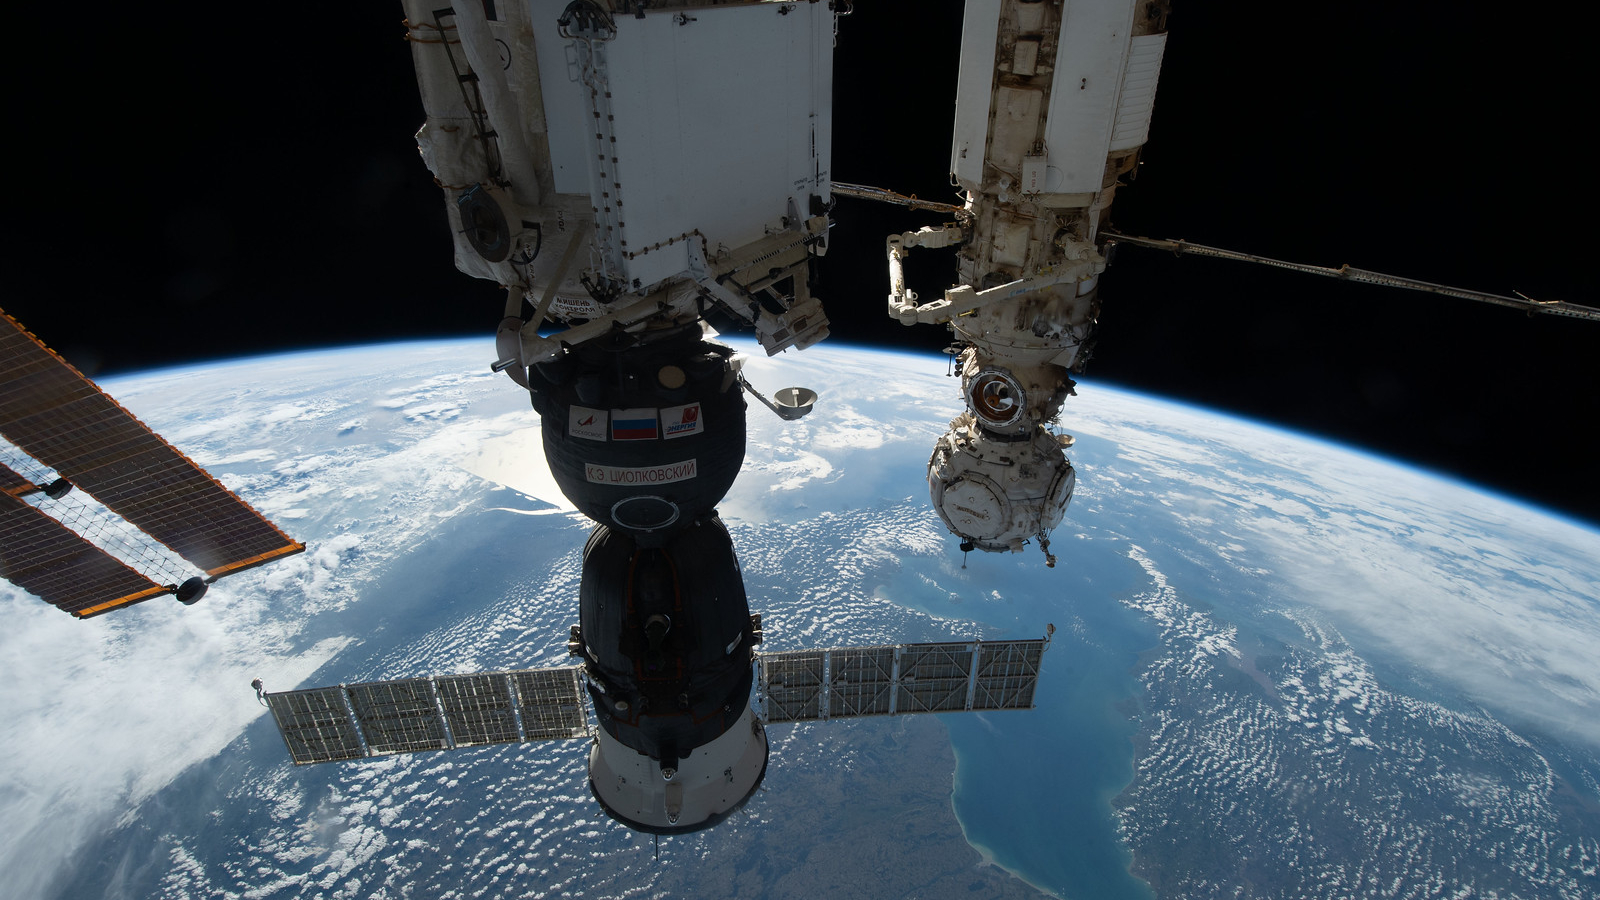 3 Astronauts May Stay On Space Station For A Full Year After Soyuz Leak